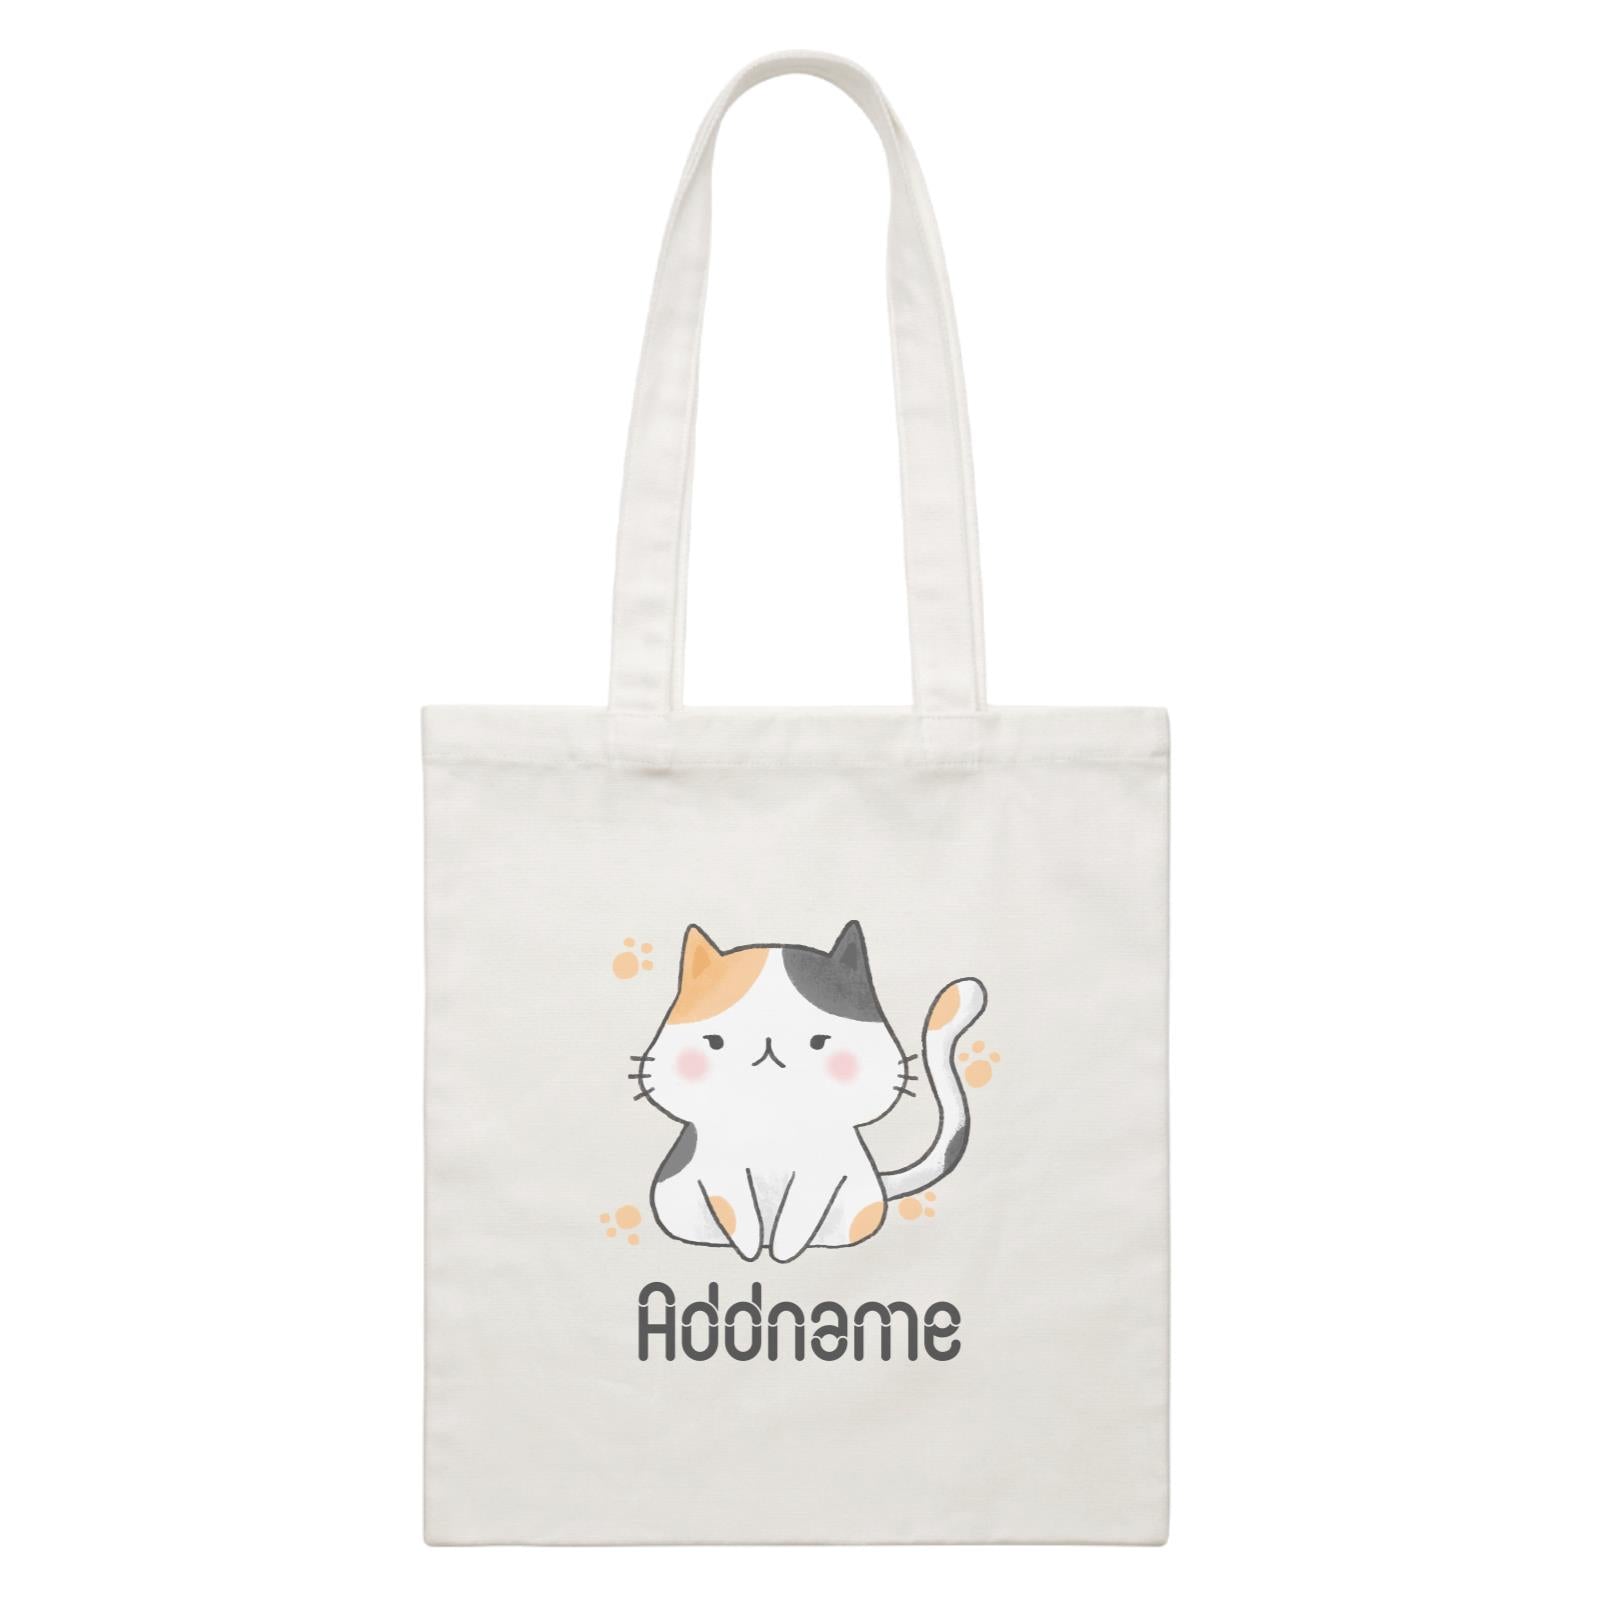 Cute Hand Drawn Style Cat Addname White Canvas Bag